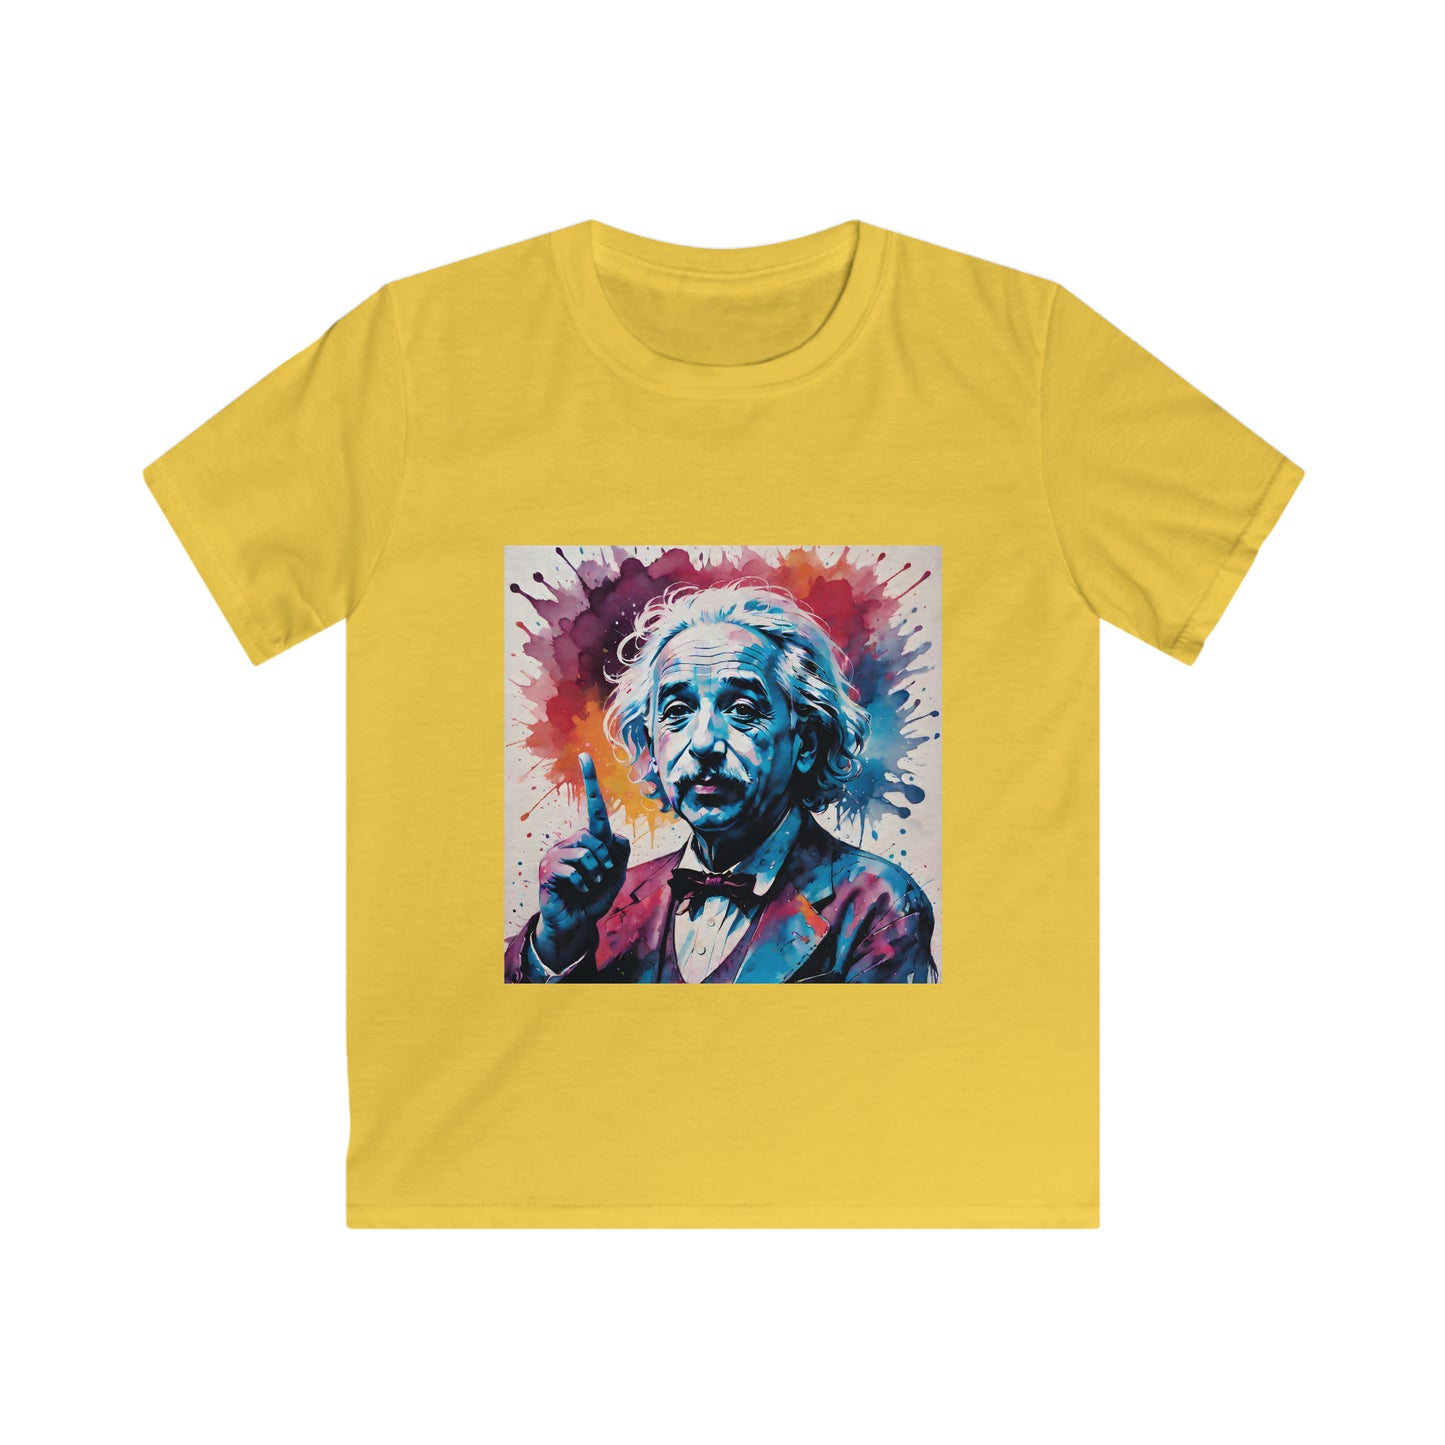 "The theory of everything" Single Print Kids Softstyle Tee